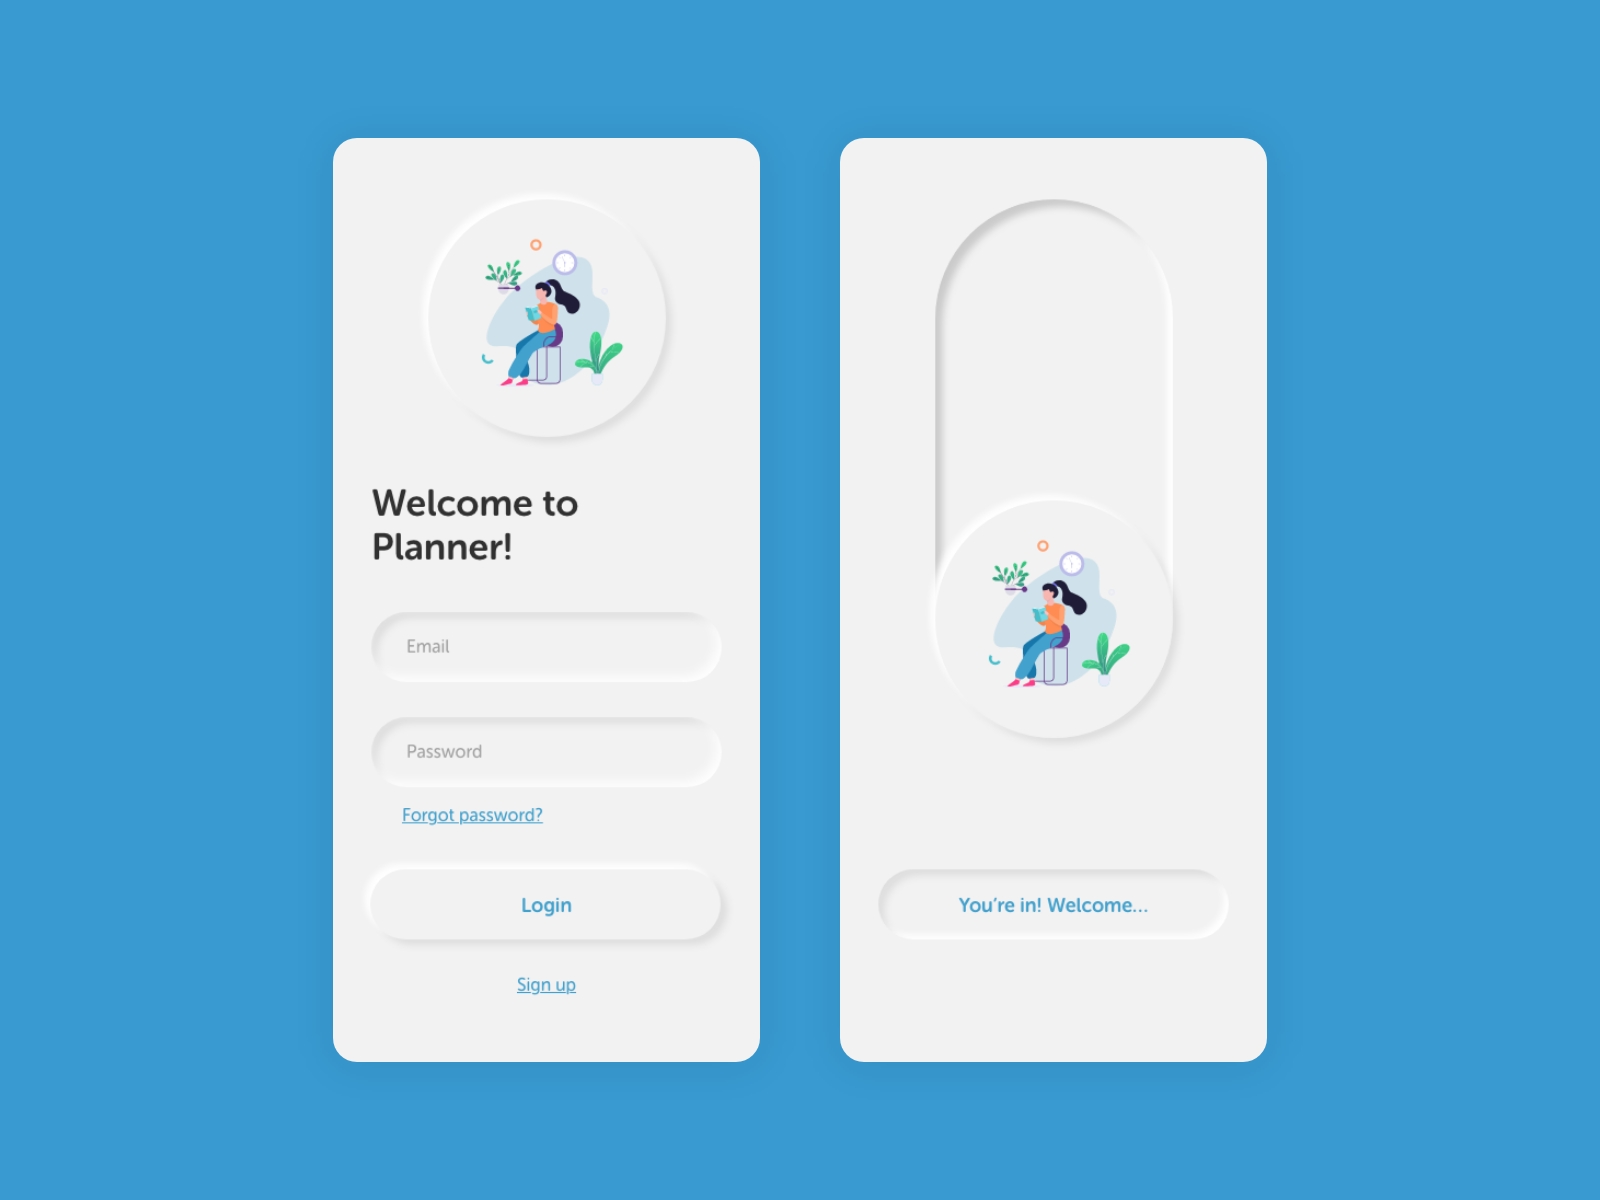 Mobile app neumorphism design of a sign-up screen.